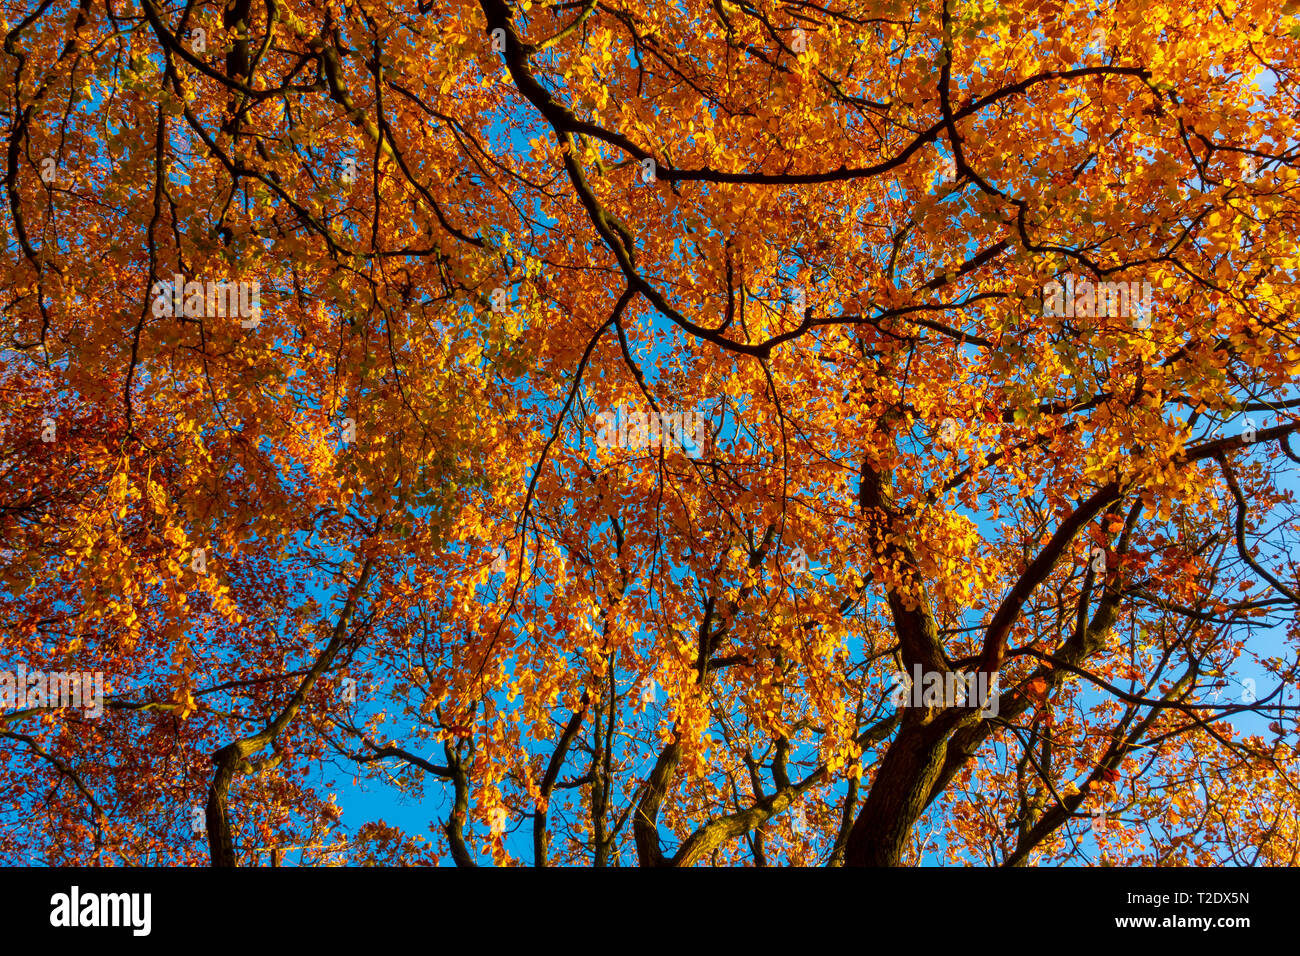 Golden Yellow leaves on trees in Autumn Stock Photo